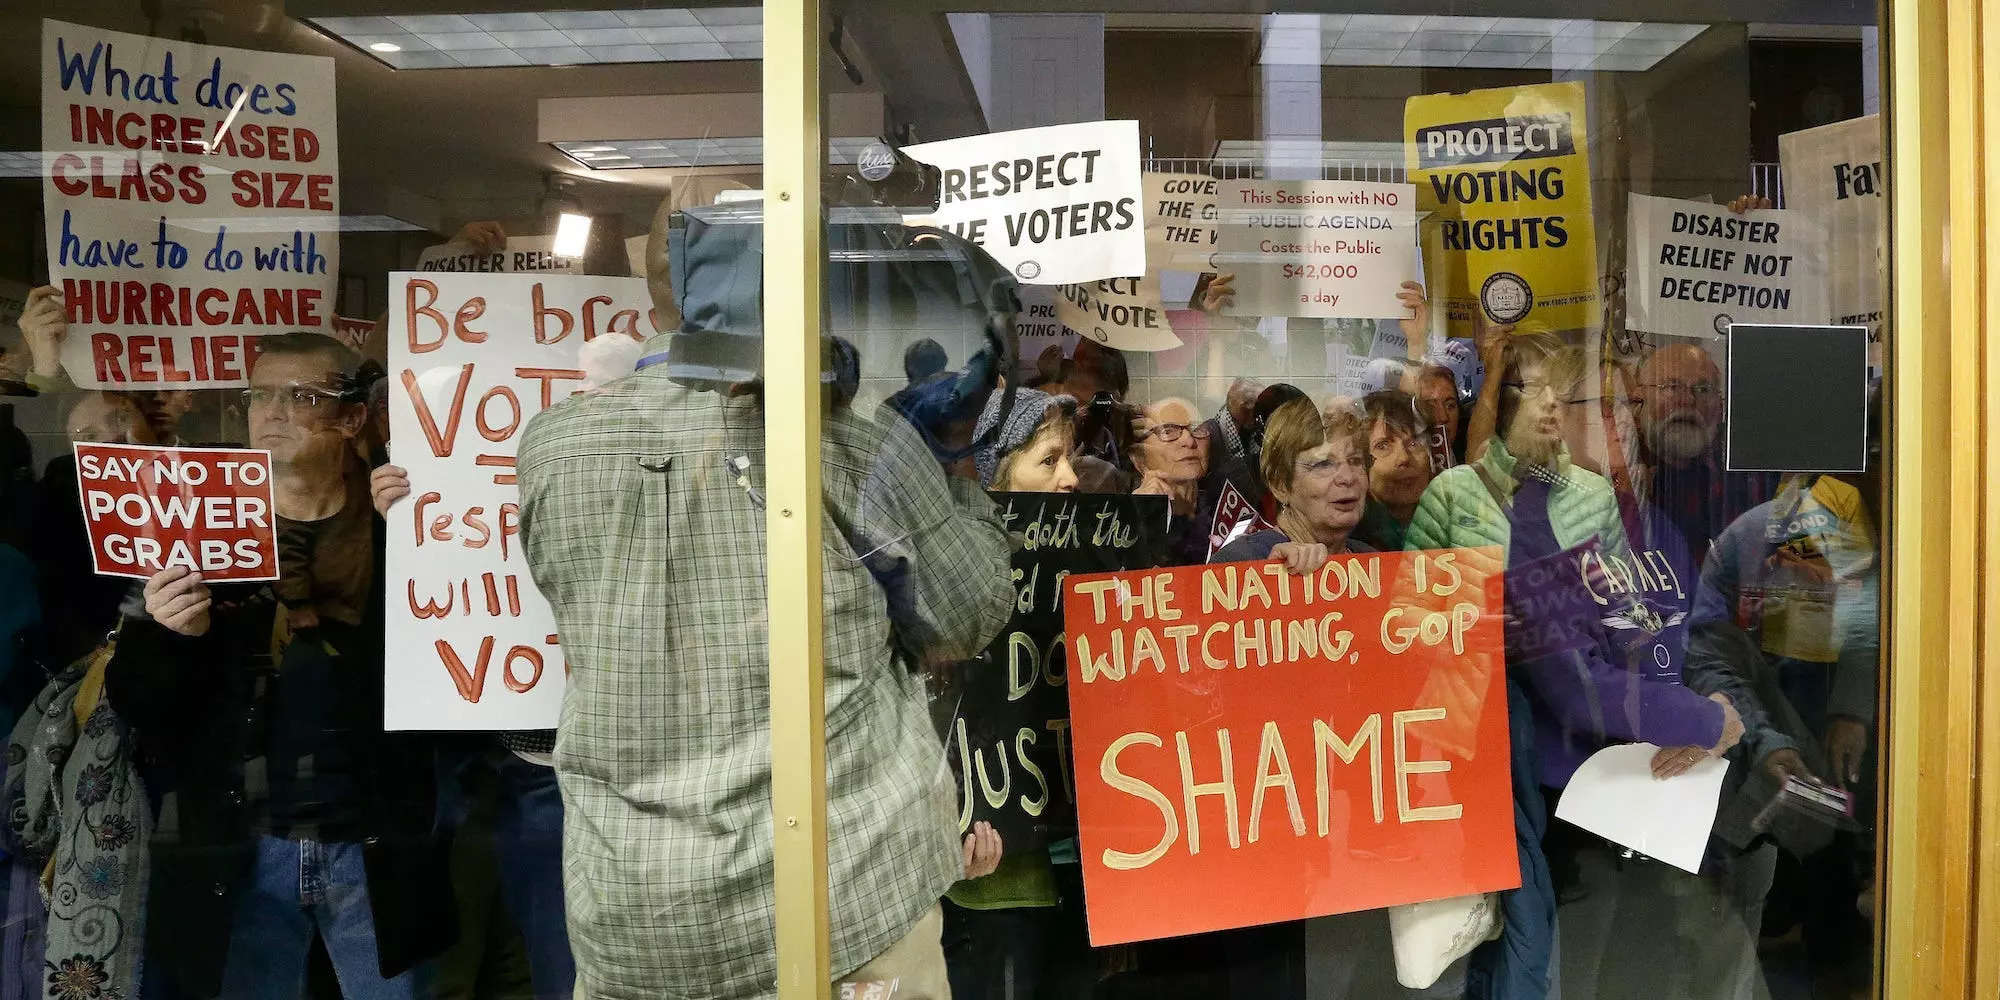 Protestors gather outside of a press conference room during a special session at the North Carolina Legislature in Raleigh, N.C., Thursday, Dec. 15, 2016.